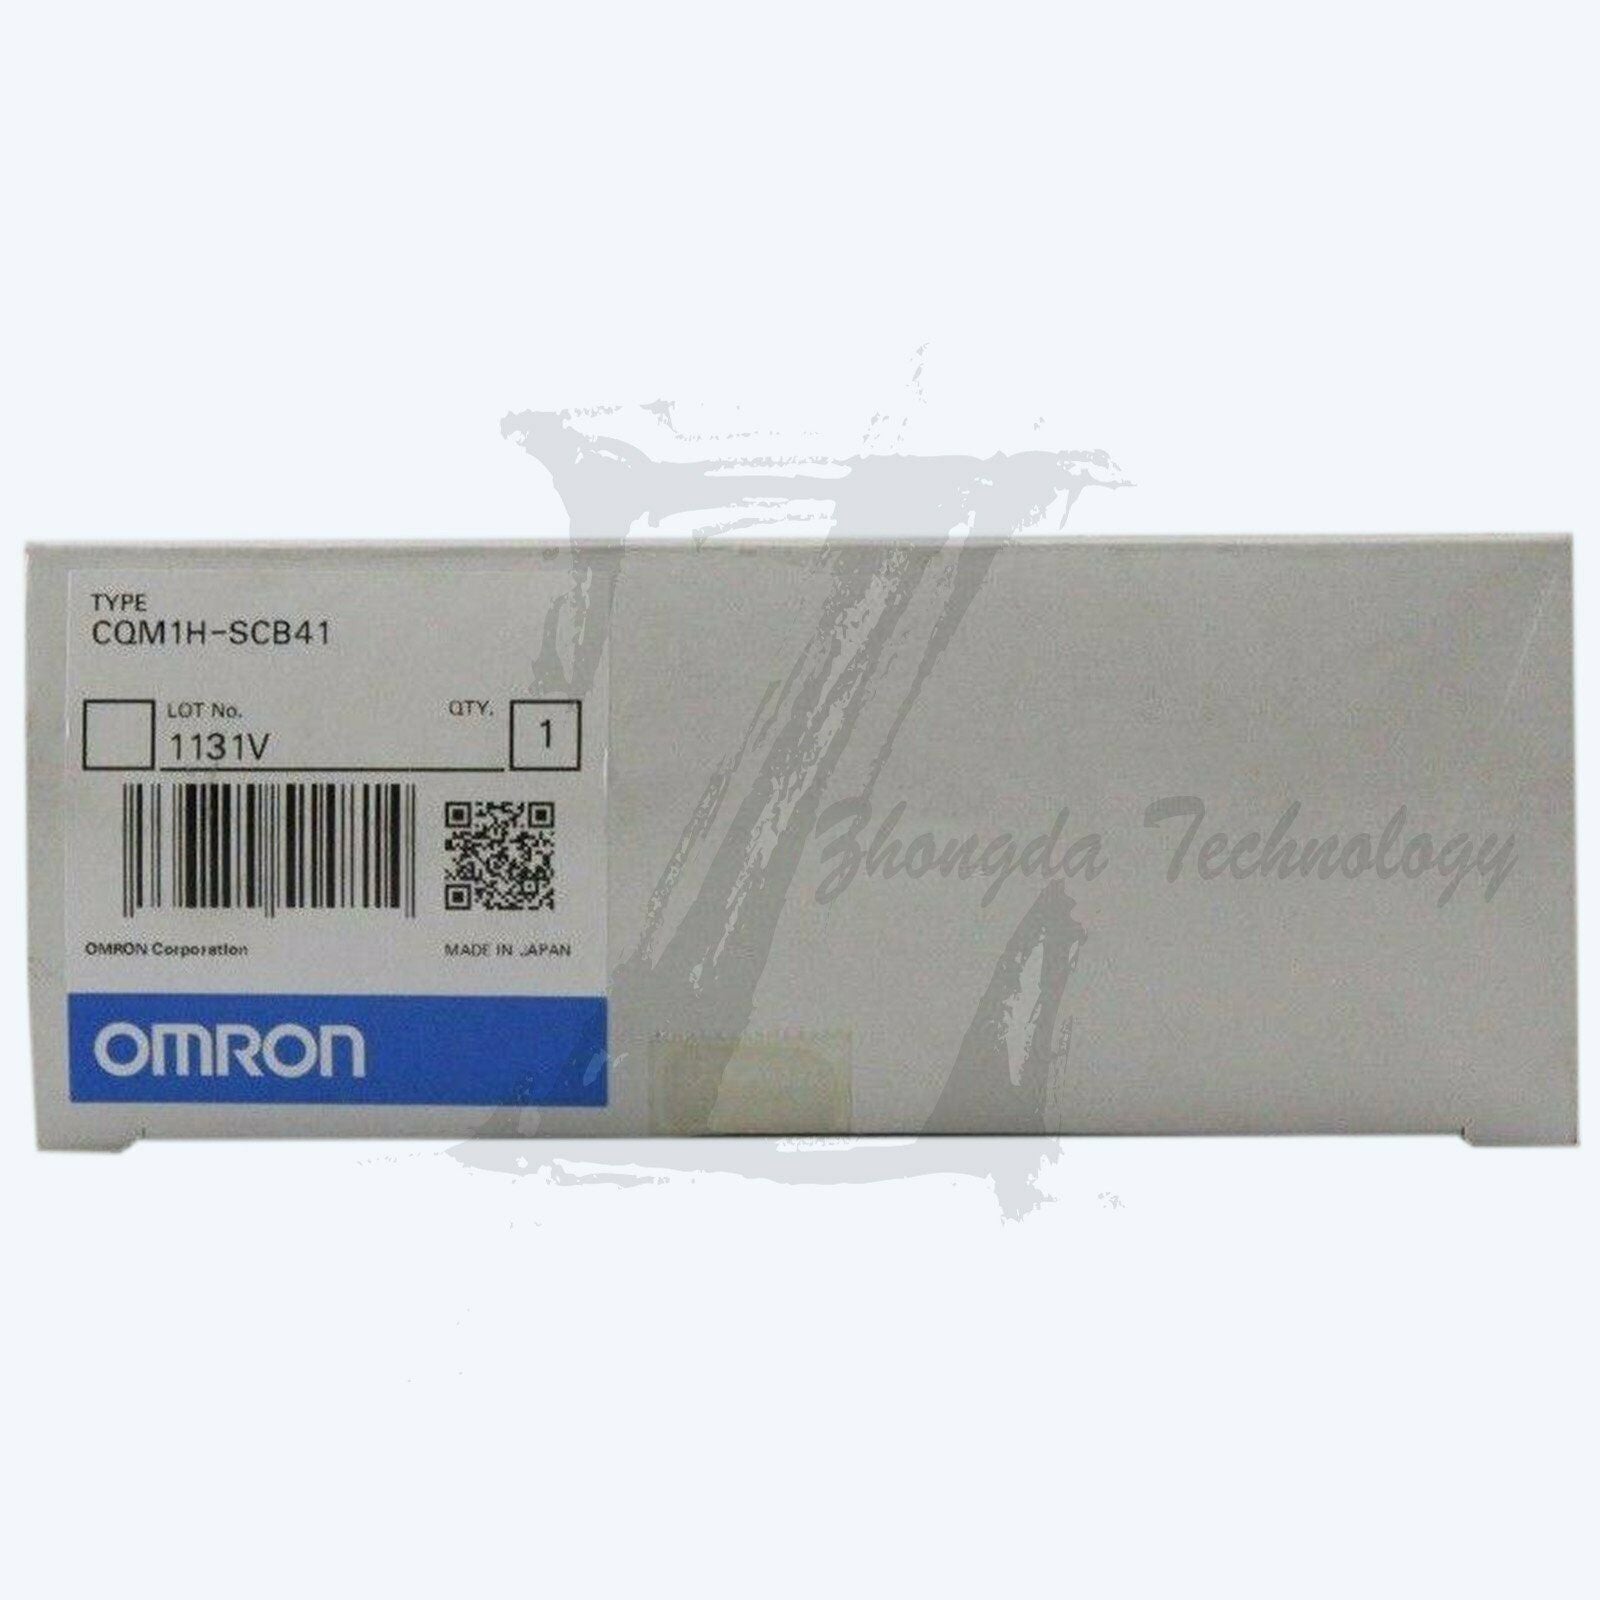 1pc new Omron CQM1H-SCB41 module one year warranty KOEED 201-500, 80%, import_2020_10_10_031751, Omron, Other